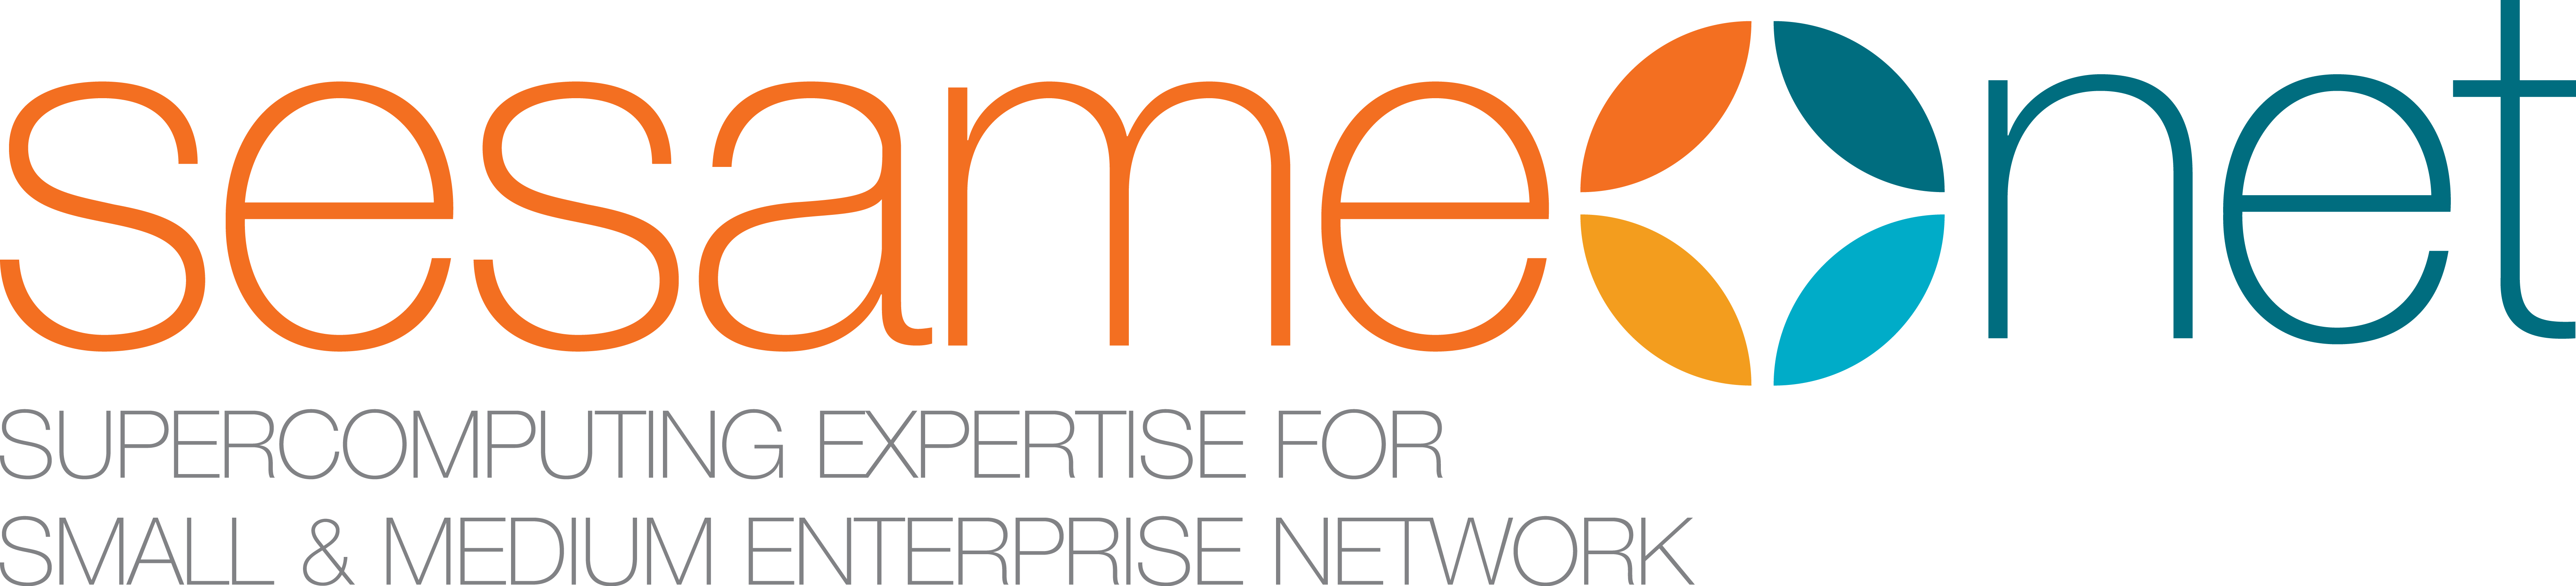 SESAME Net Workshop with Training: Network of Competence Centres for Supporting Small Enterprises in the Application of HPC Technology